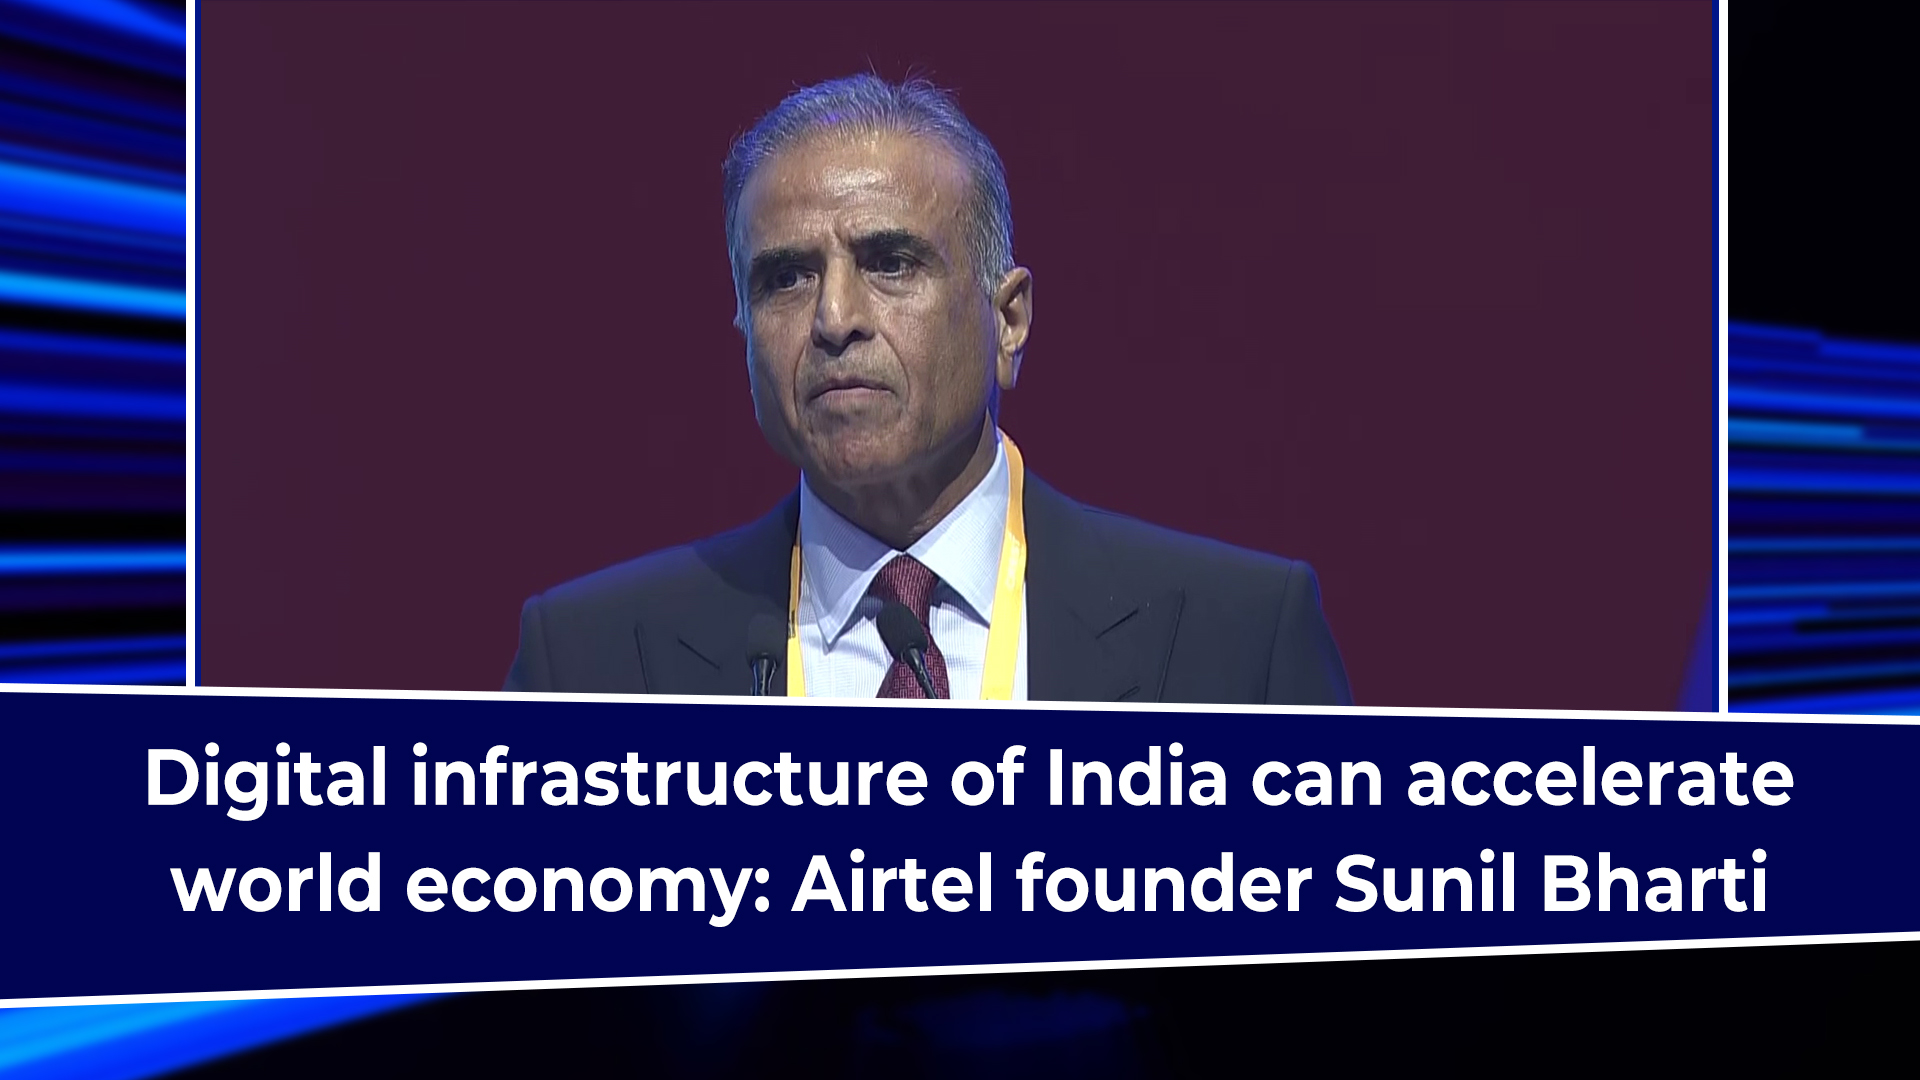 Digital infrastructure of India can accelerate world economy: Airtel founder Sunil Bharti